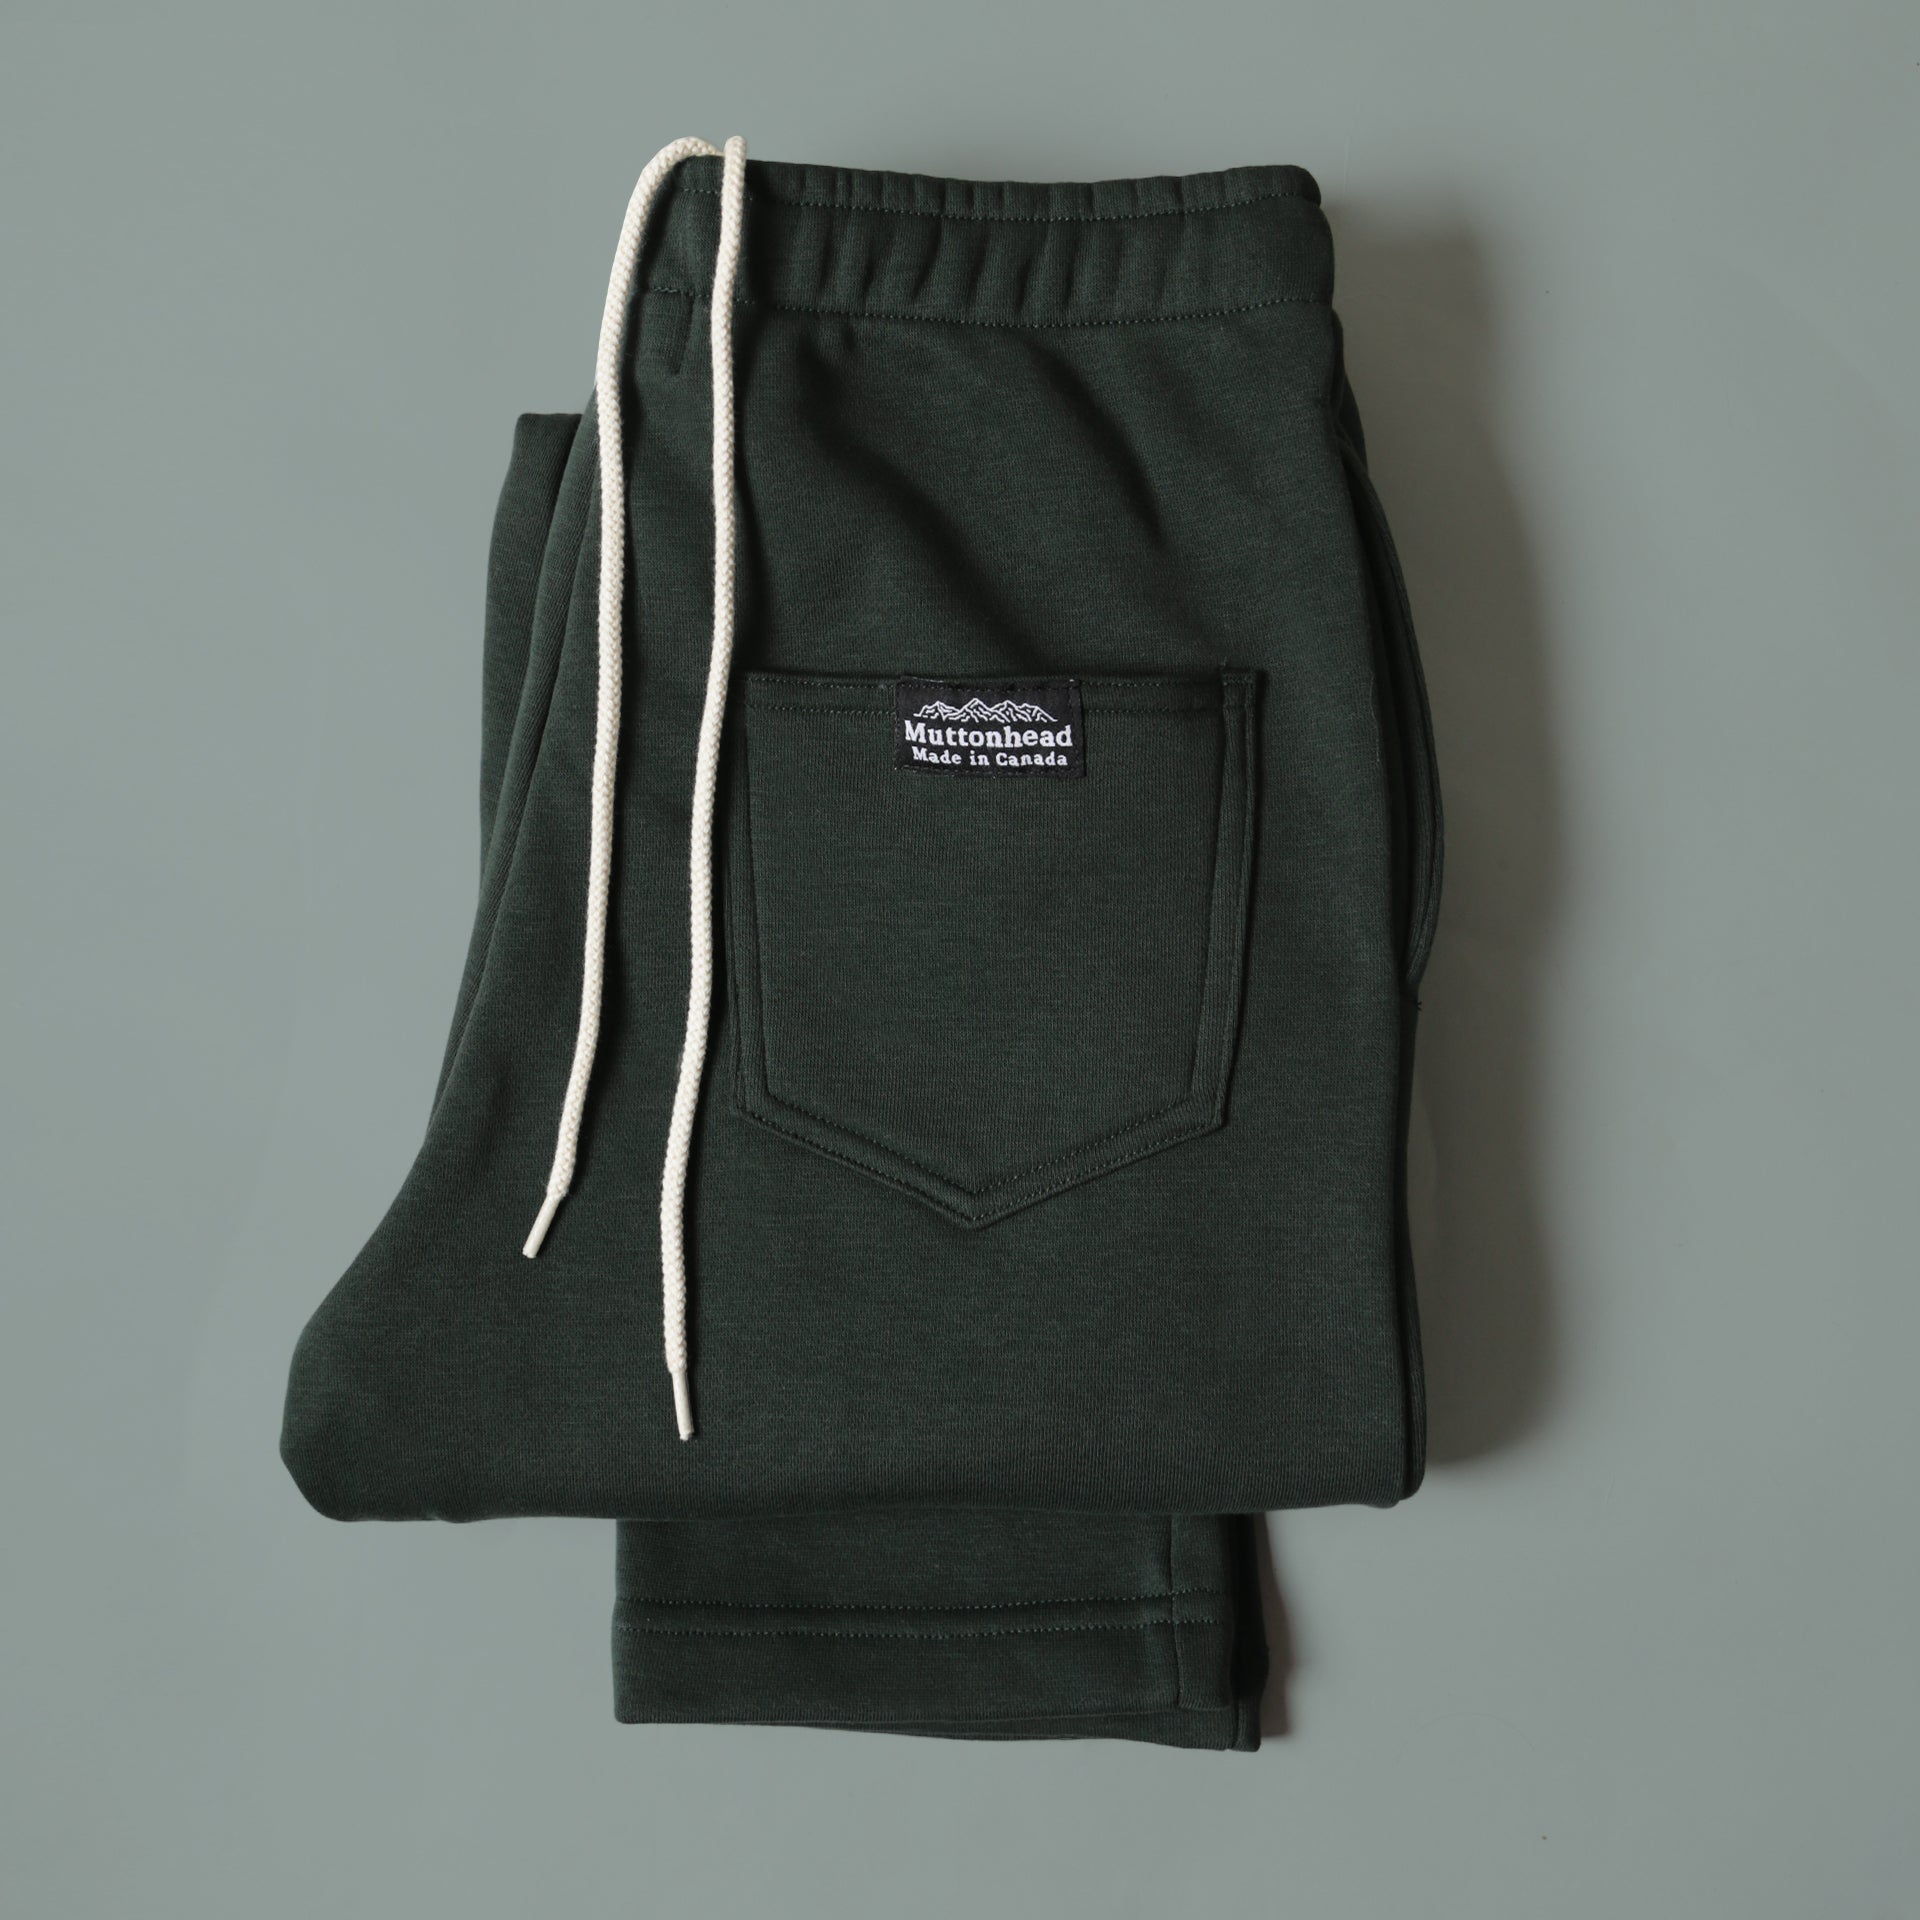 Easy Pant - Forest – MUTTONHEAD